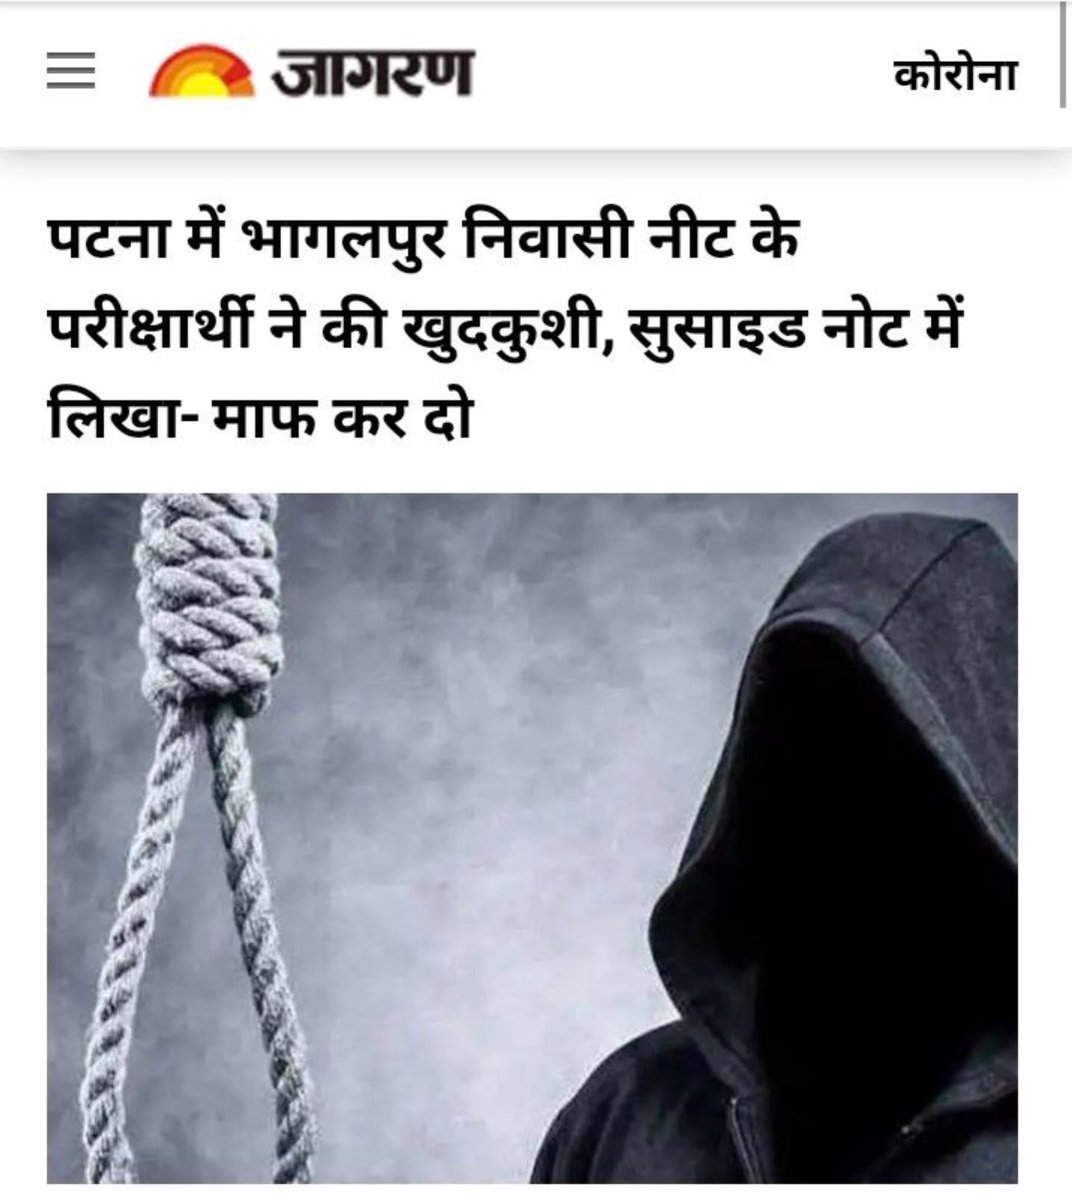 One more student committed  suicide and no one is there to pay heed to genuine issues of students.
Media has lost its credibility.
@PMOIndia @DrRPNishank
@DrJitendraSingh @aajtak
@ABPNews @indiatvnews
#आत्महत्यारोकथामदिवस 
#PostponeUPSC_CSE #DelhiChaloStudents #POSTPONEJEE_NEET